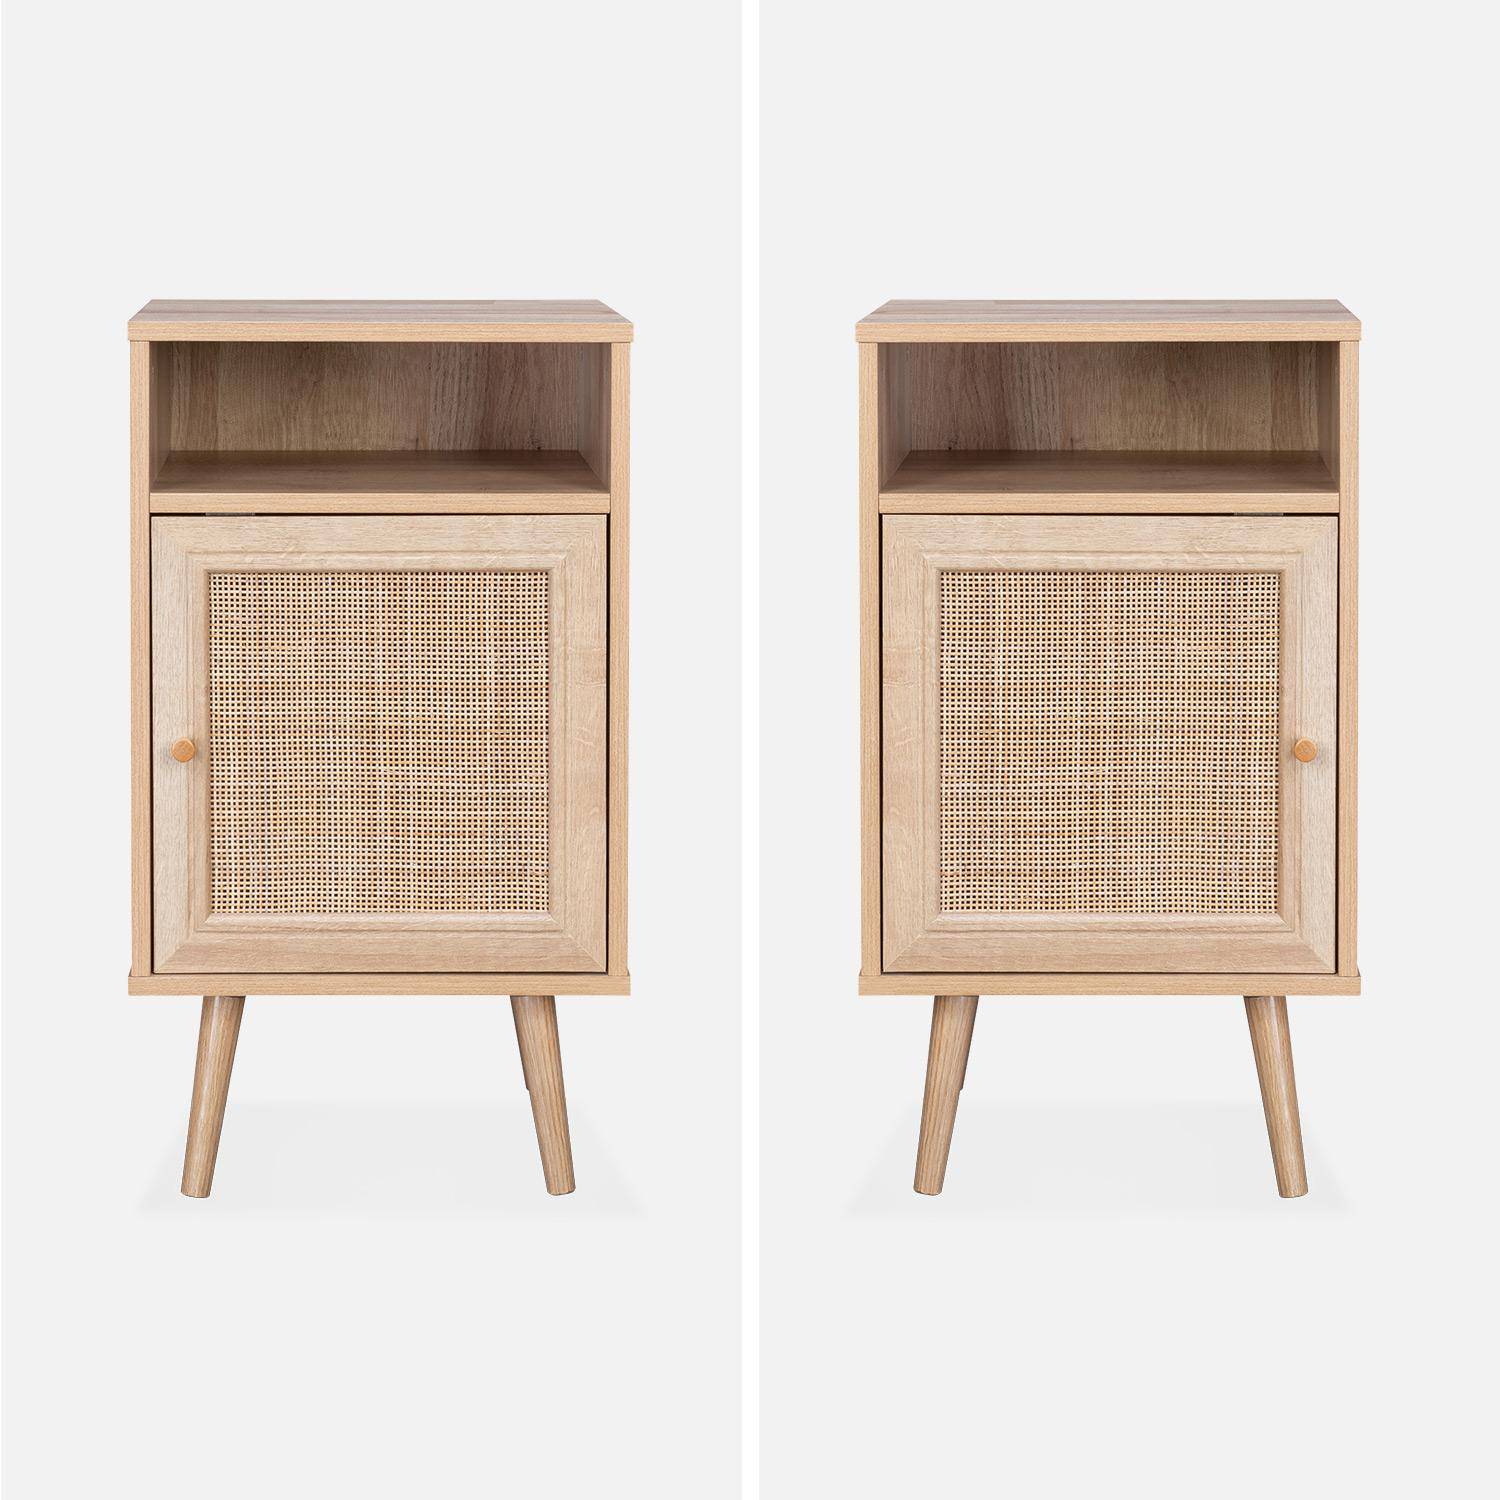 Pair of Scandi-style wood and cane rattan bedside tables with cupboard, 40x39x70cm - Boheme - Natural Wood colour,sweeek,Photo6